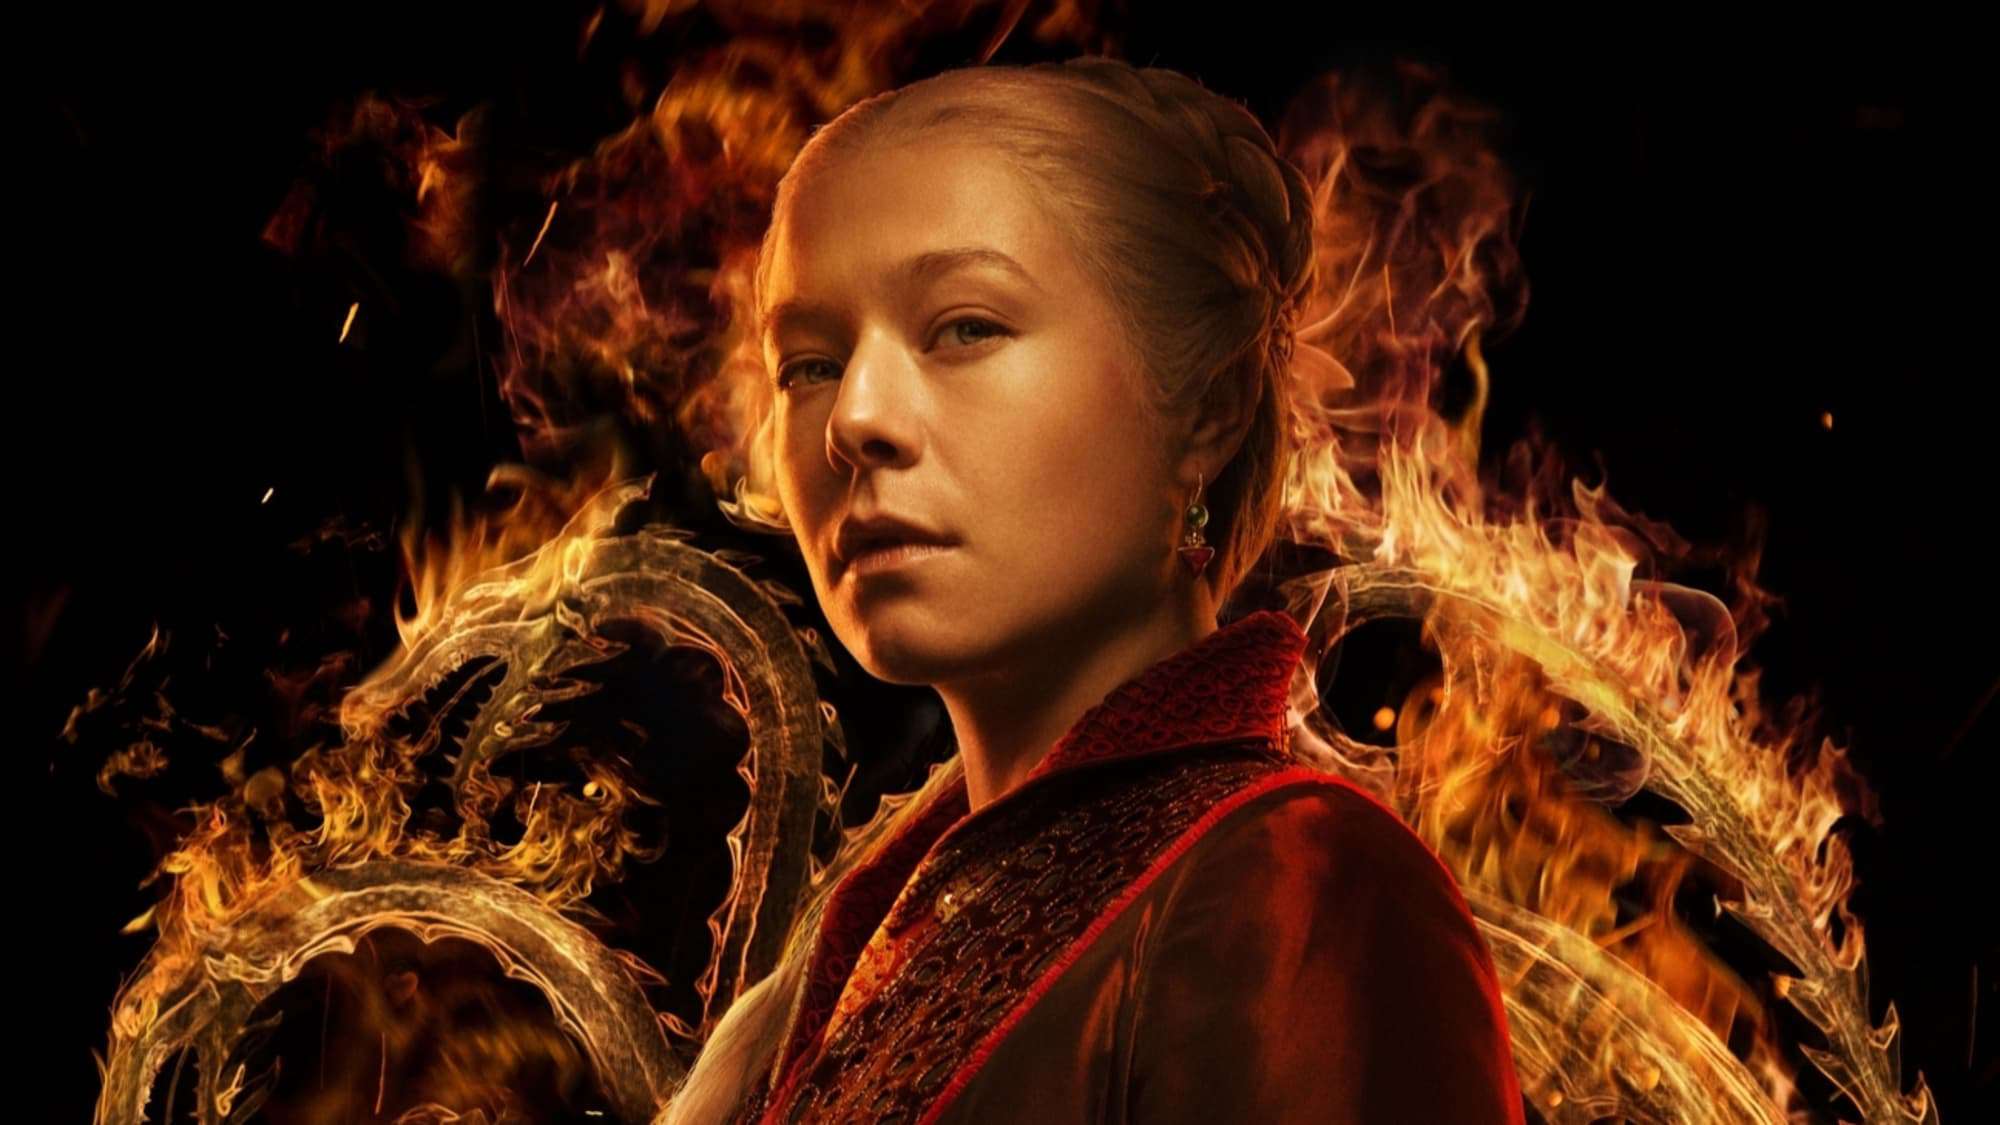 House of the Dragon fans lament long-awaited cast change in